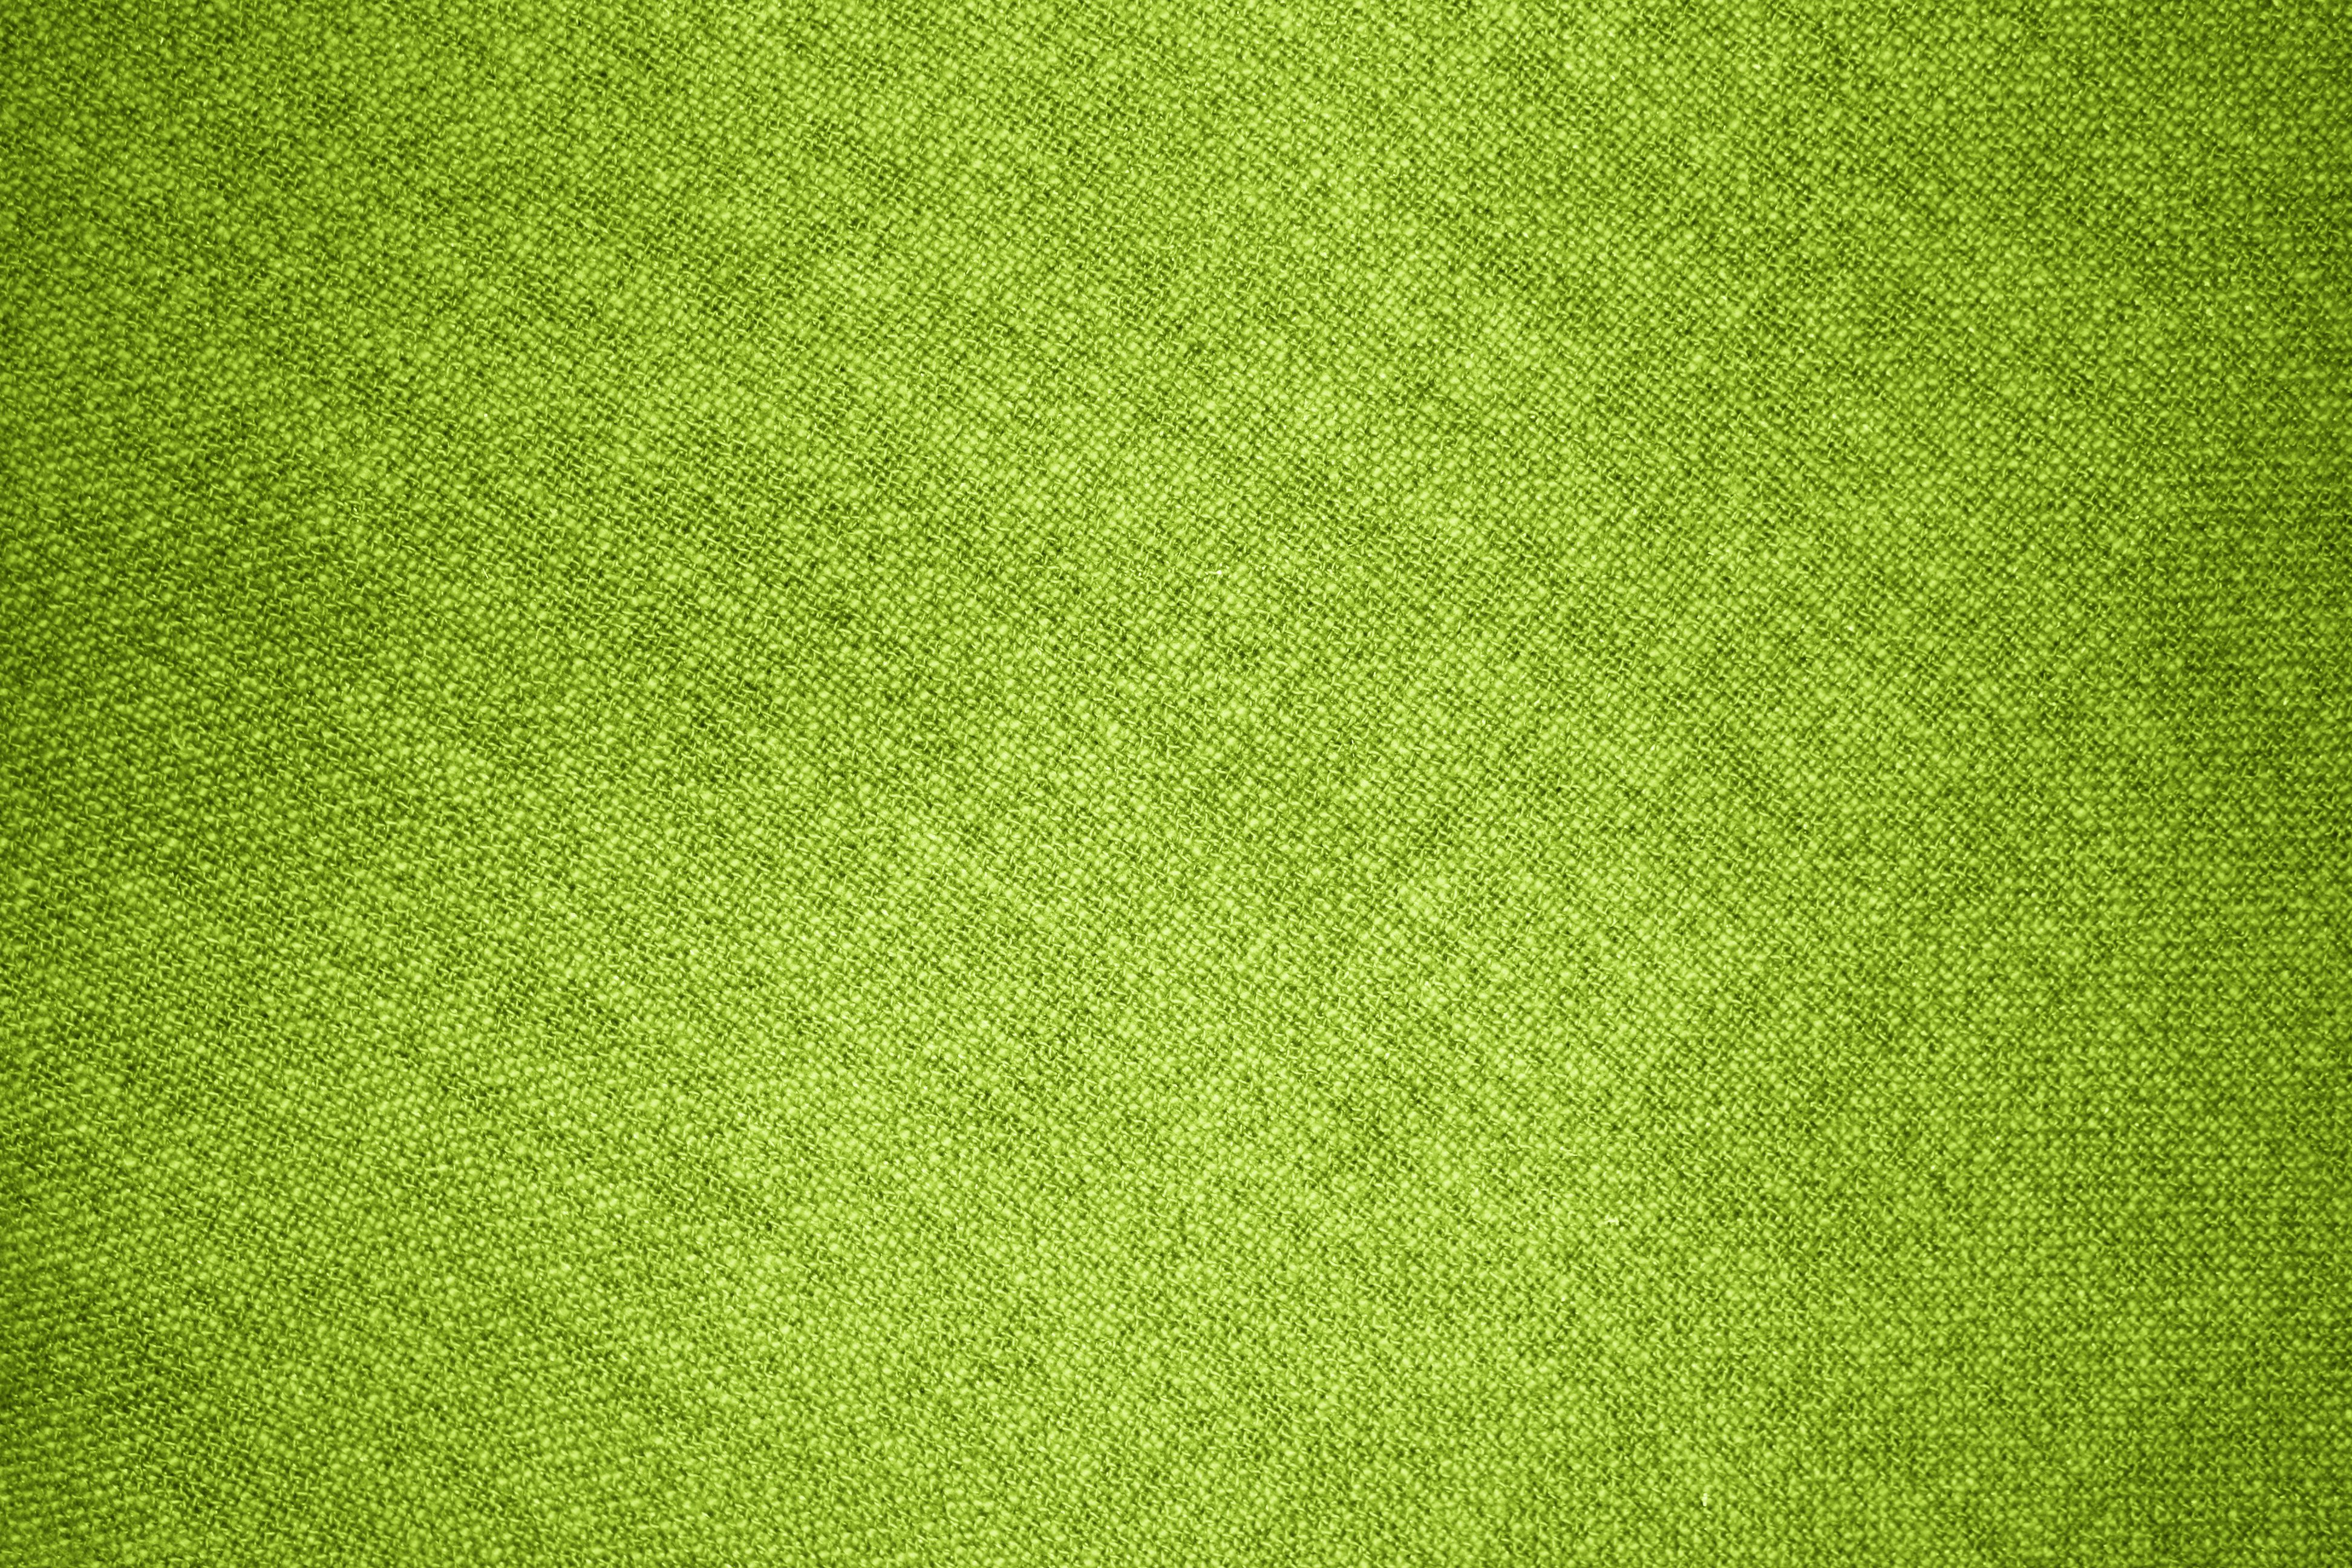 Lime Green Fabric Texture Picture | Free Photograph | Photos Public ...